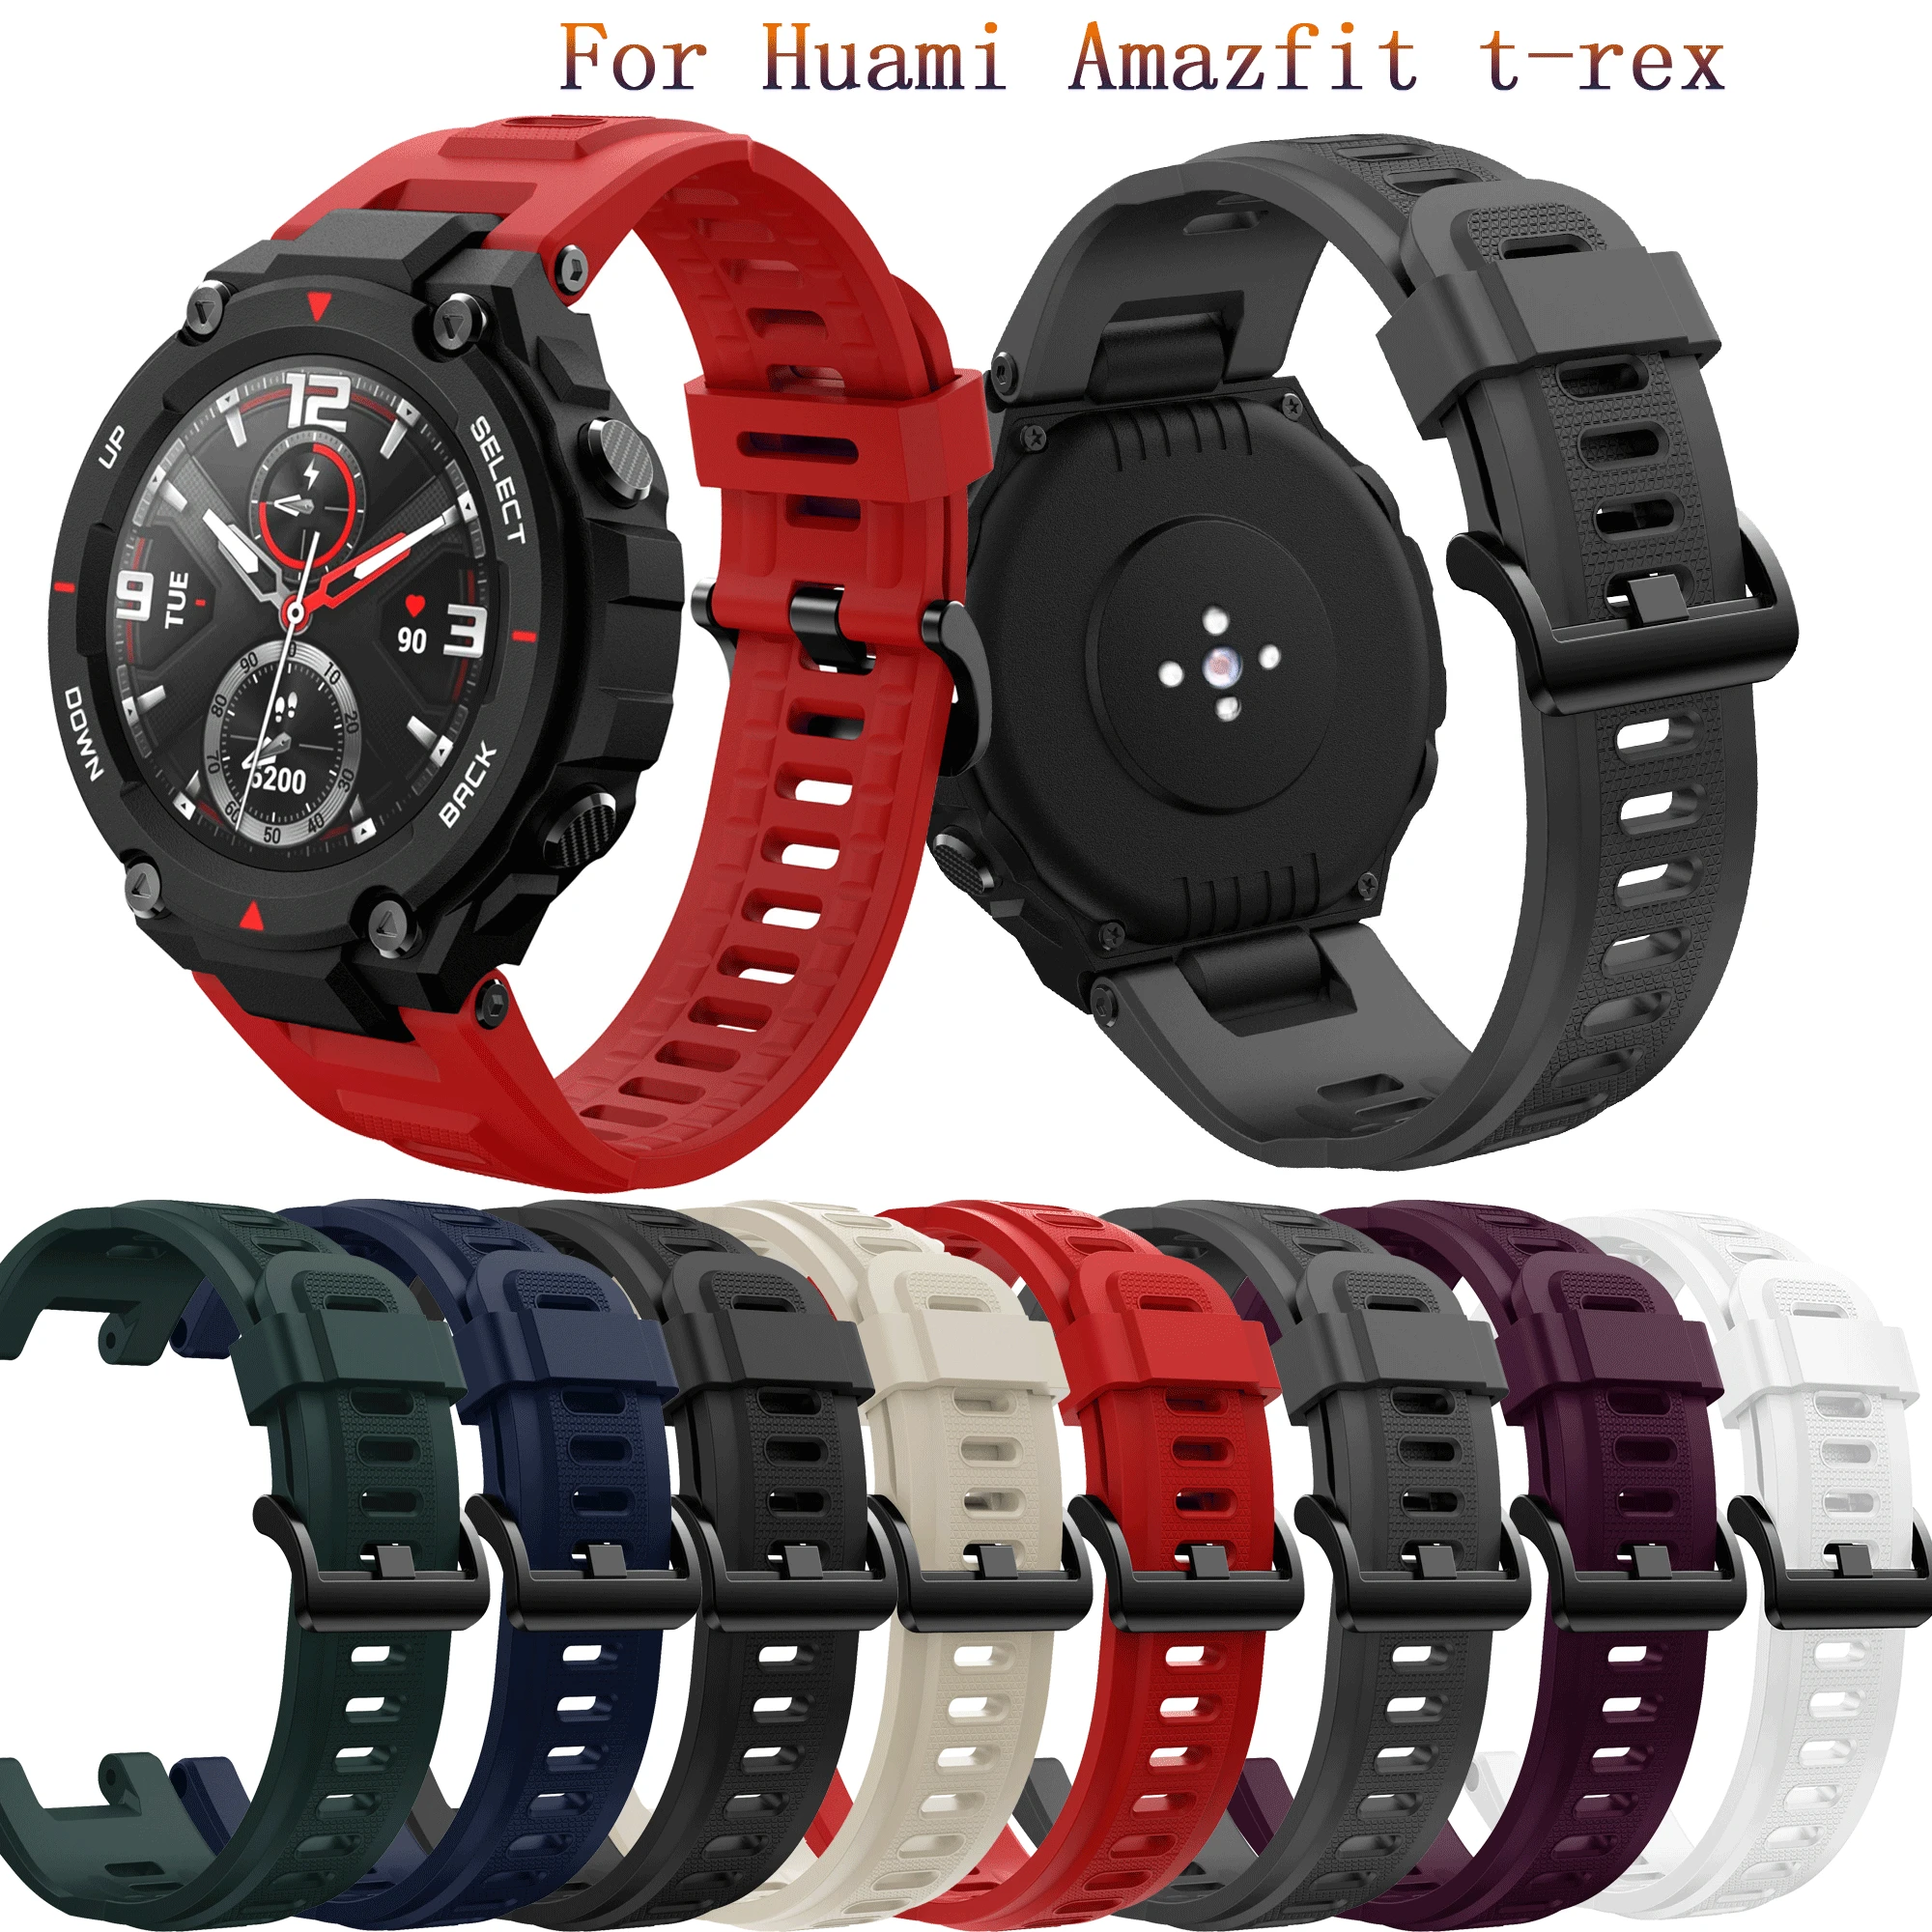 New Replacement Sport Strap For Huami Amazfit T-Rex Adjustable Strap Bracelet For Xiaomi Amazfit T-Rex Pro Watch Silicone Strap